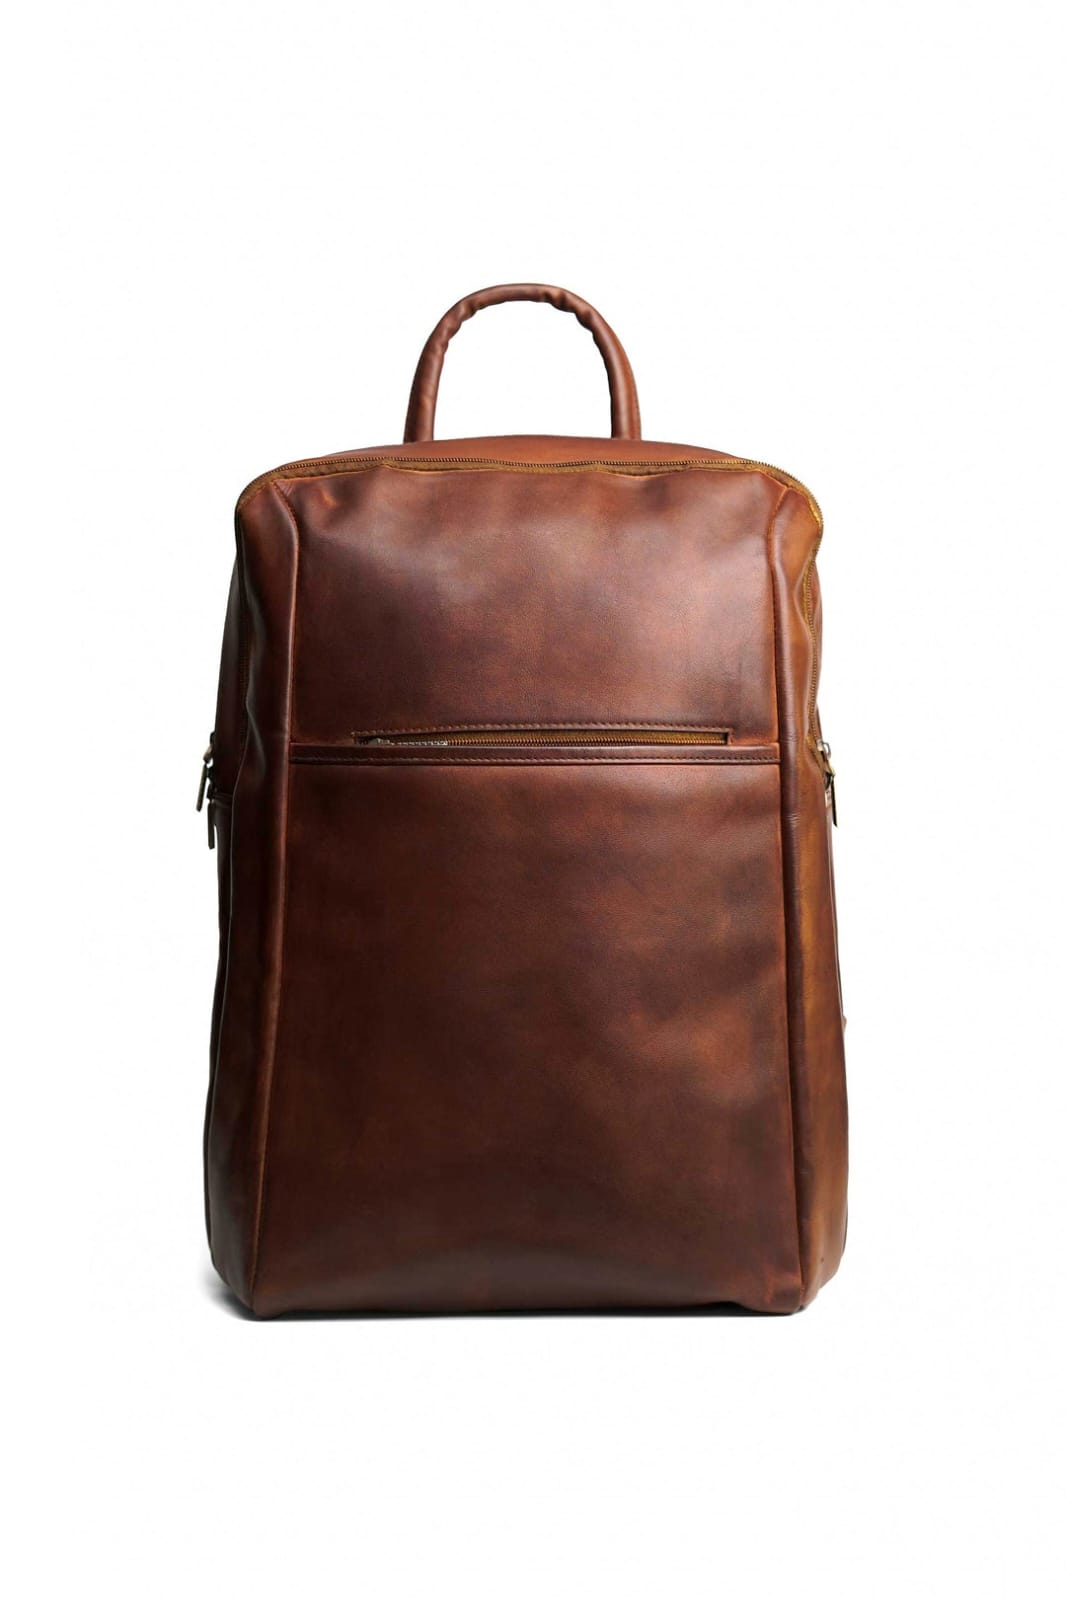 Buy Best Brown Leather Backpack Pakistan - Idrees Leather